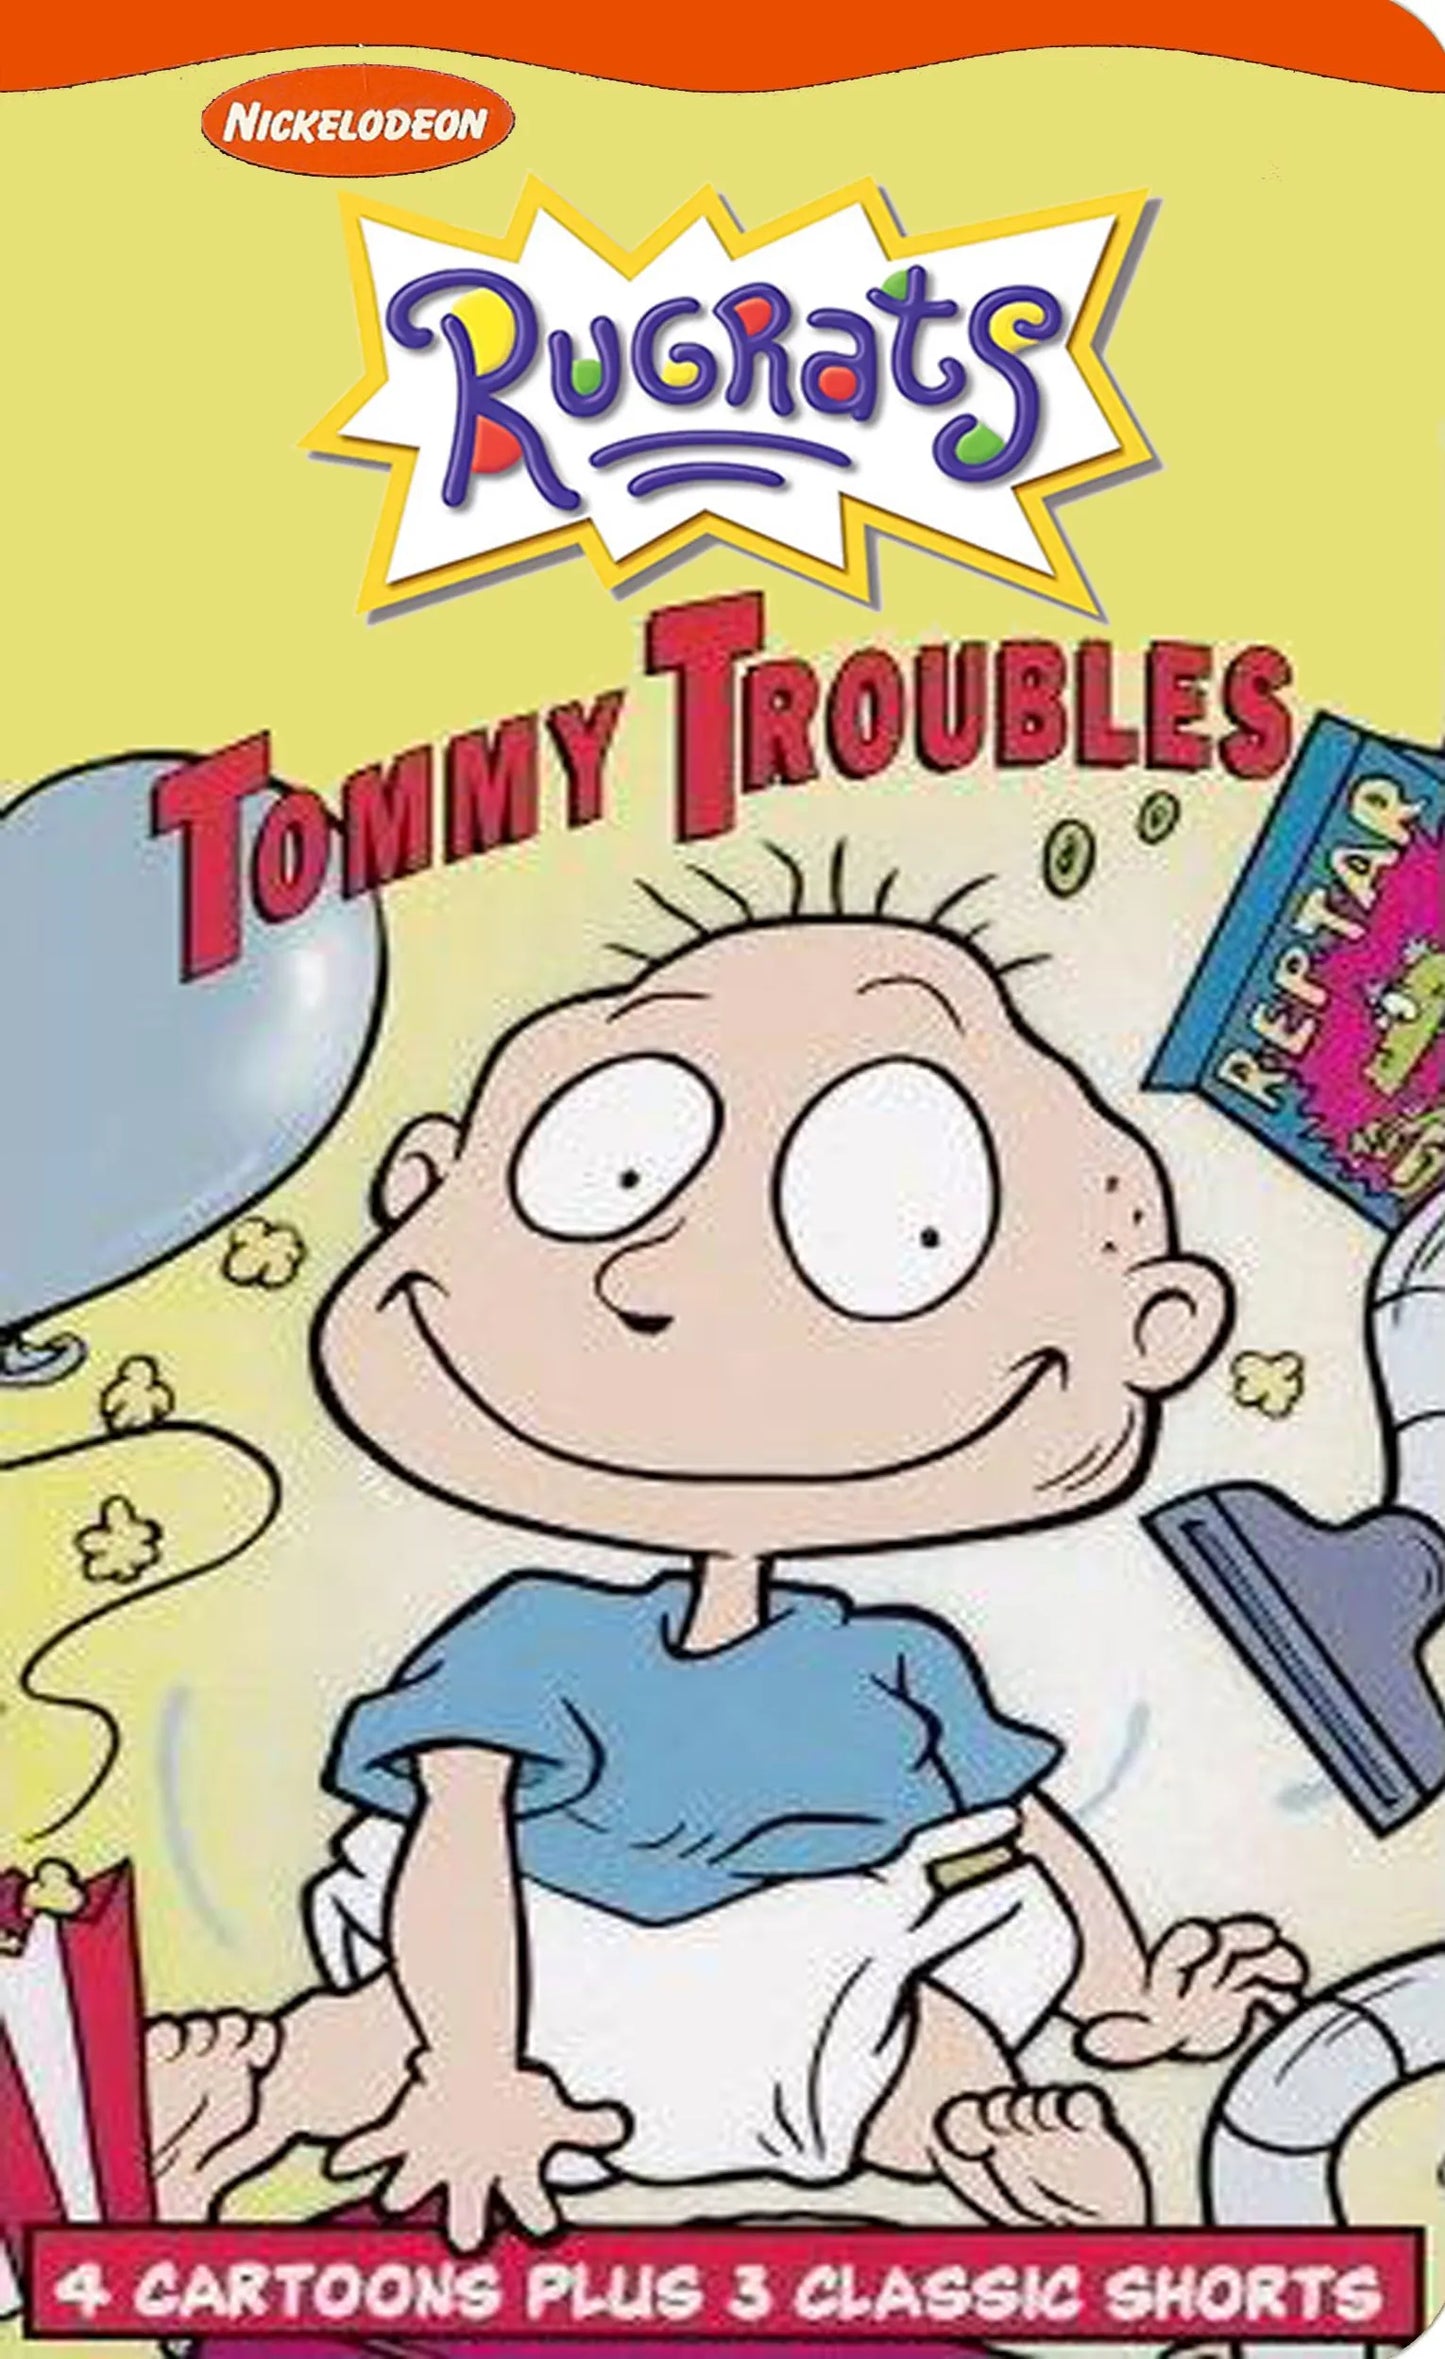 Rugrats: Tommy Troubles VHS (1996)